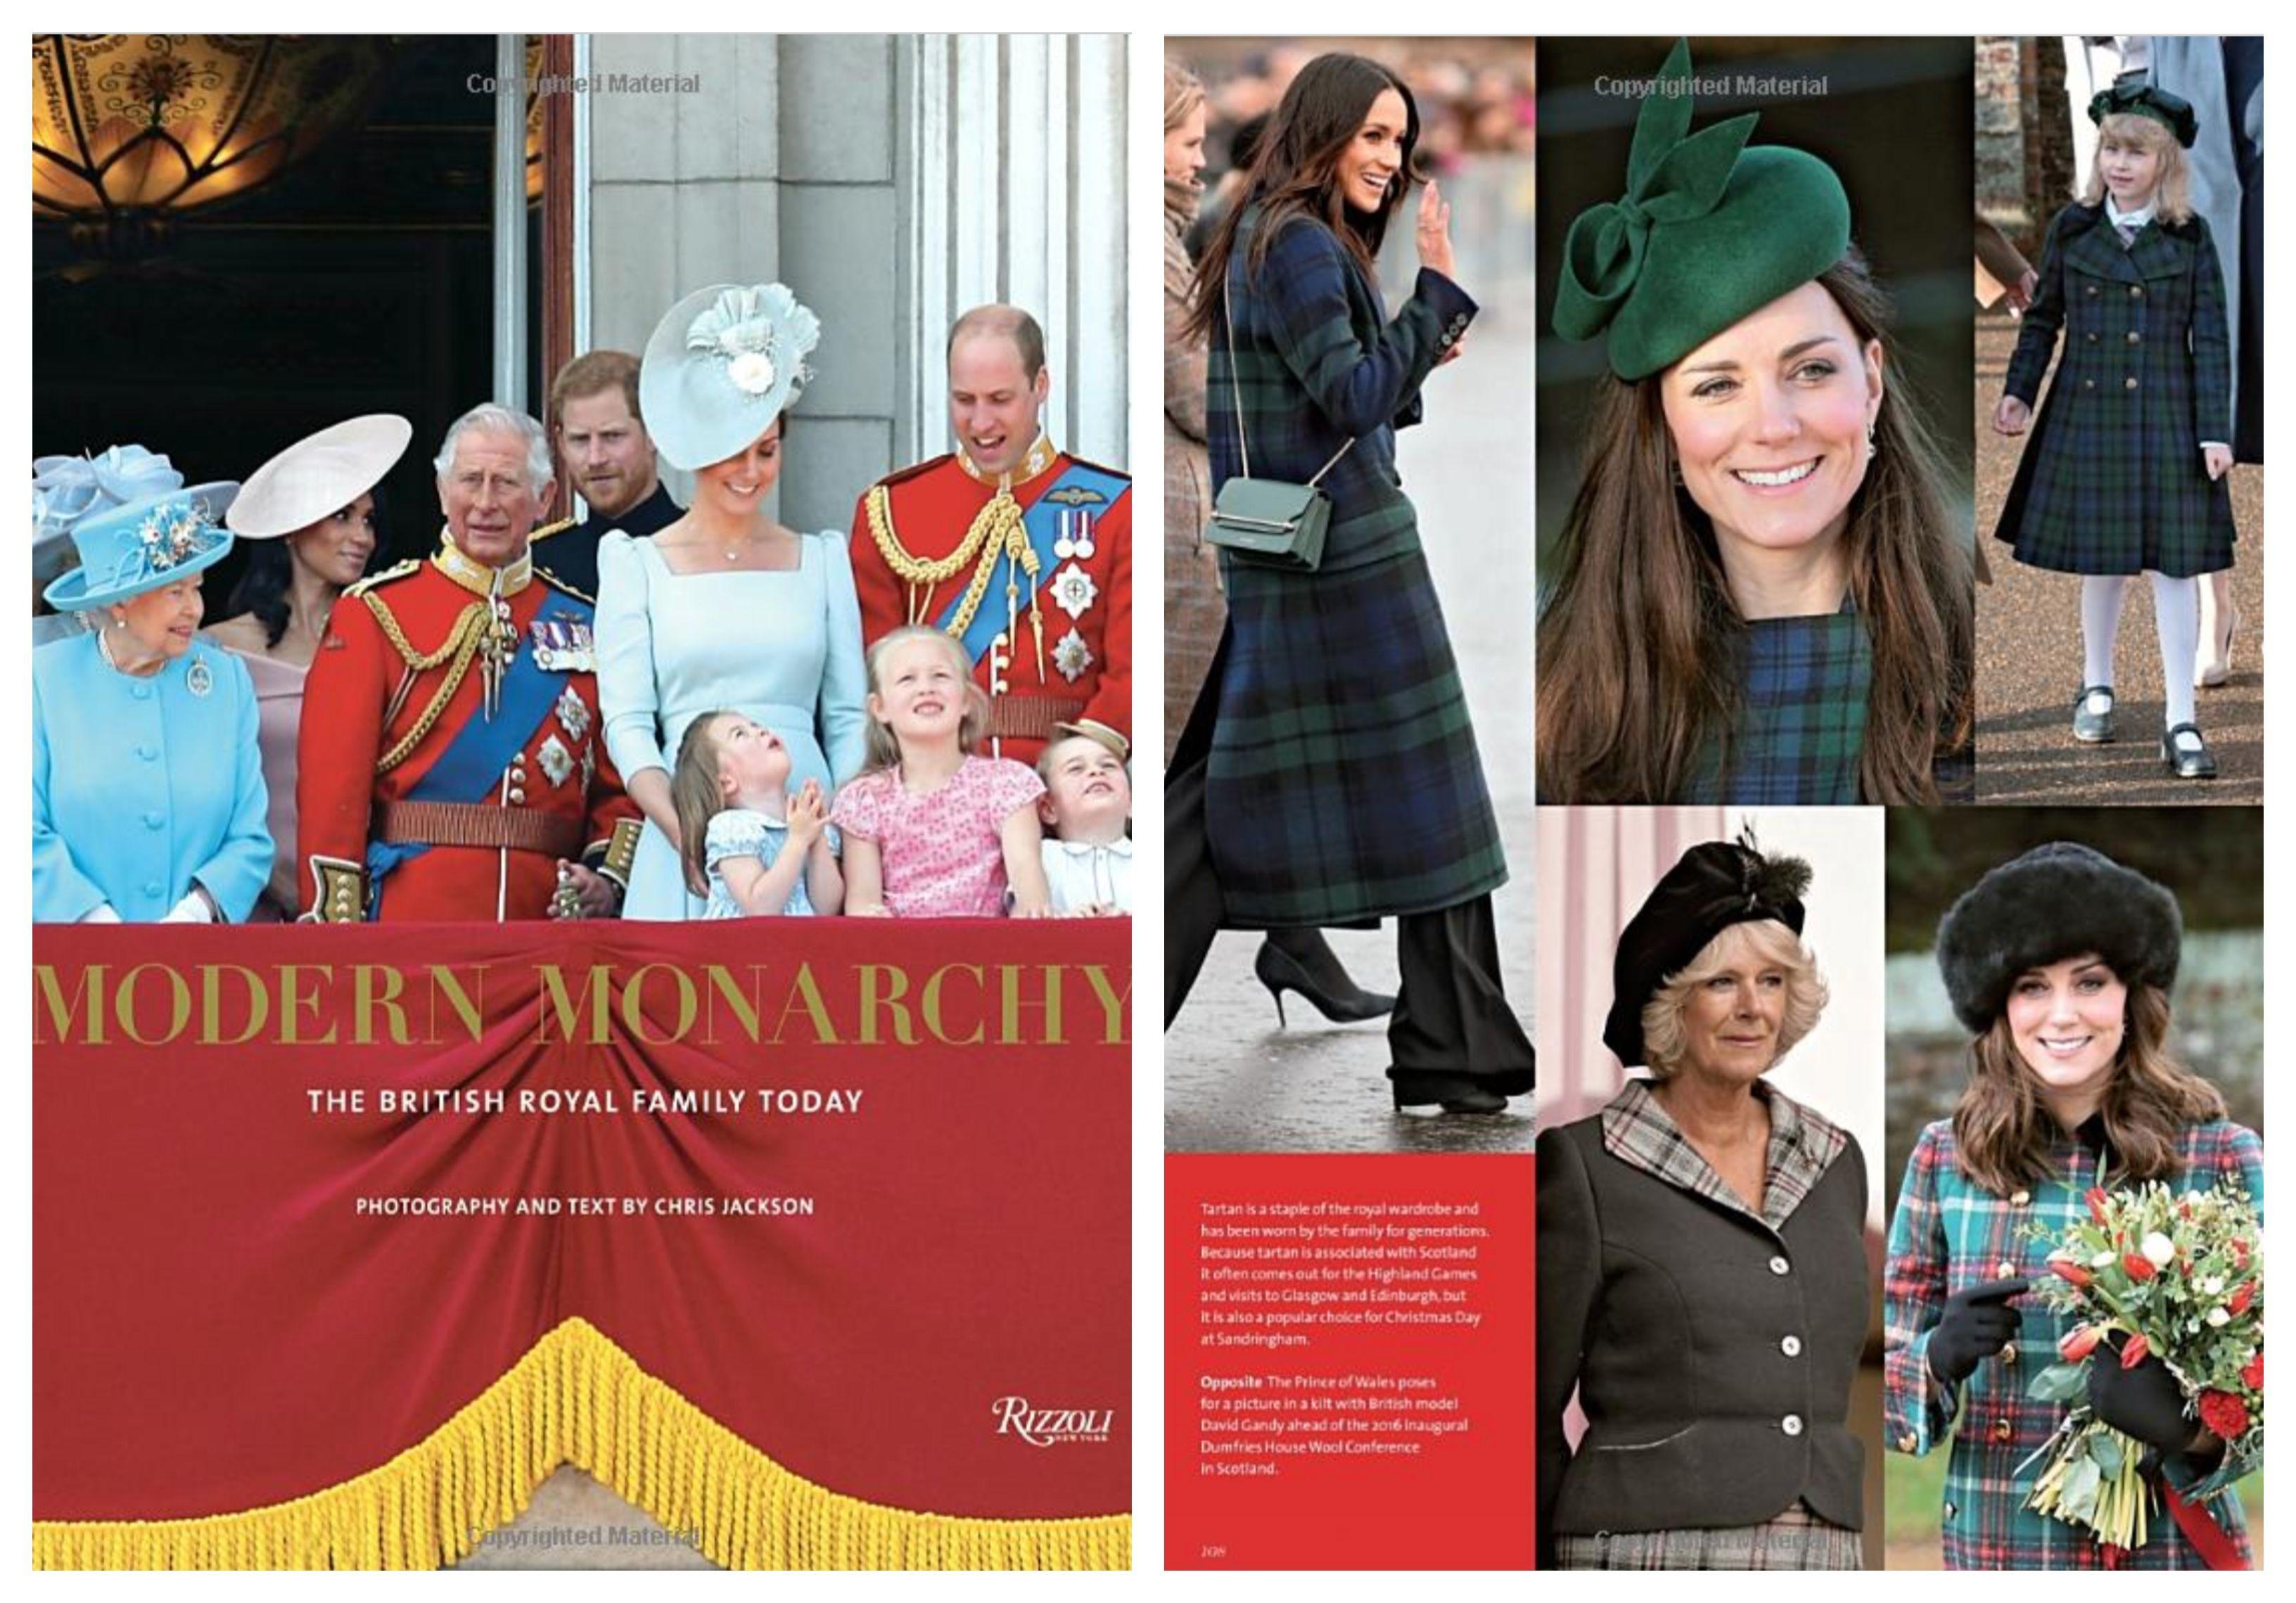 Smiling Catherine The Duchess of Cambridge - signed limited edition - Photograph by Chris Jackson